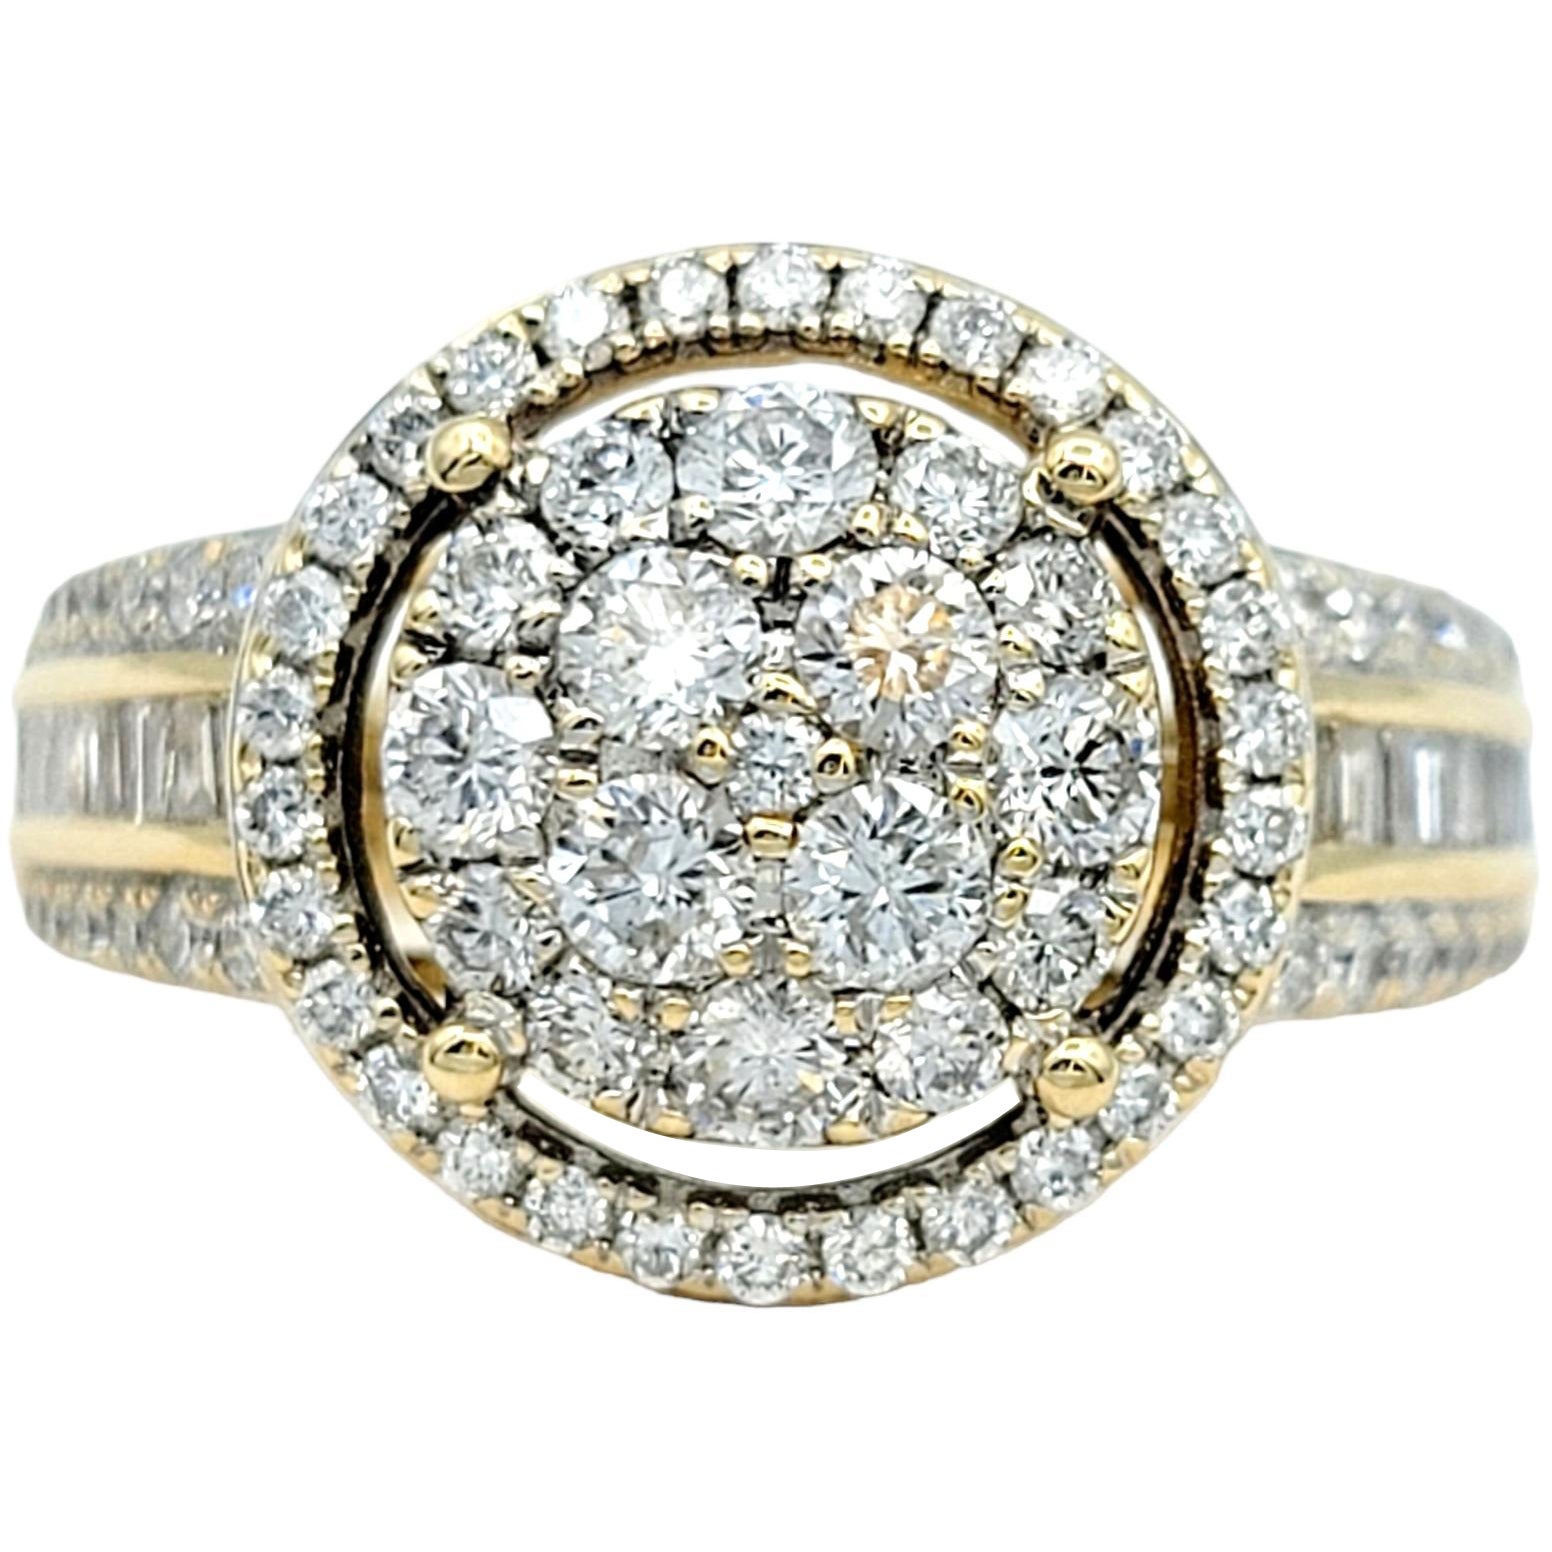 Round Diamond Cluster Ring with Halo and Tapered Baguette Sides in 14K Gold 